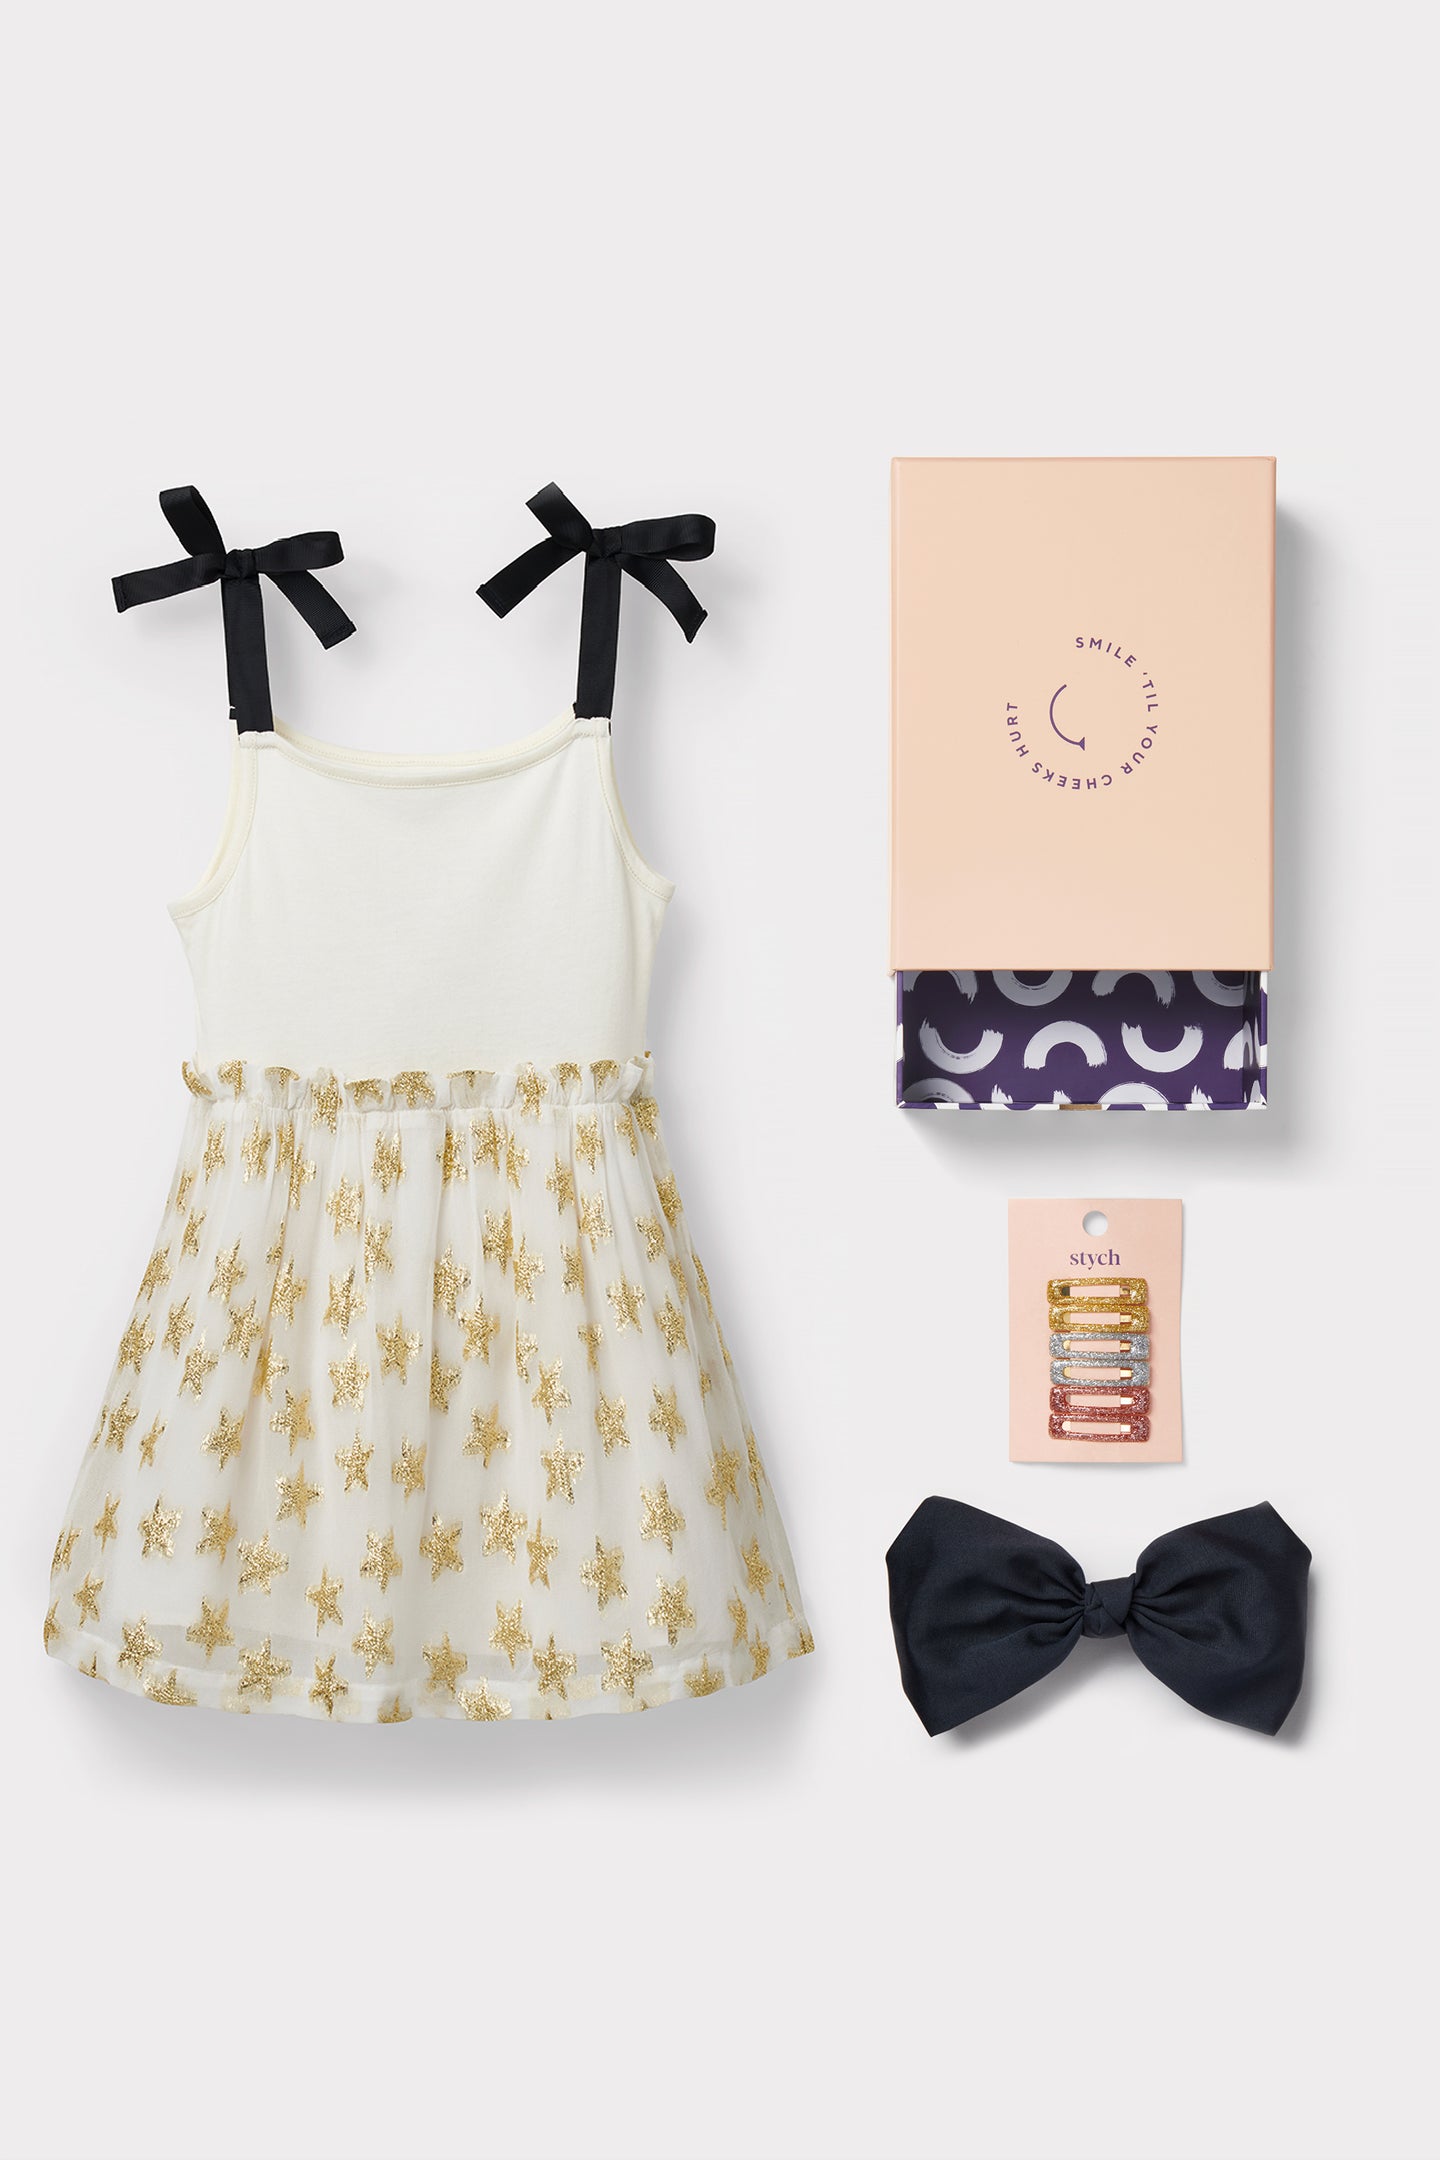 Stych Girl's Pretty Luxe Star Tulle Dress & Accessories Gift Box Gift Wrapped Ages 3-4, 5-6, 7-8